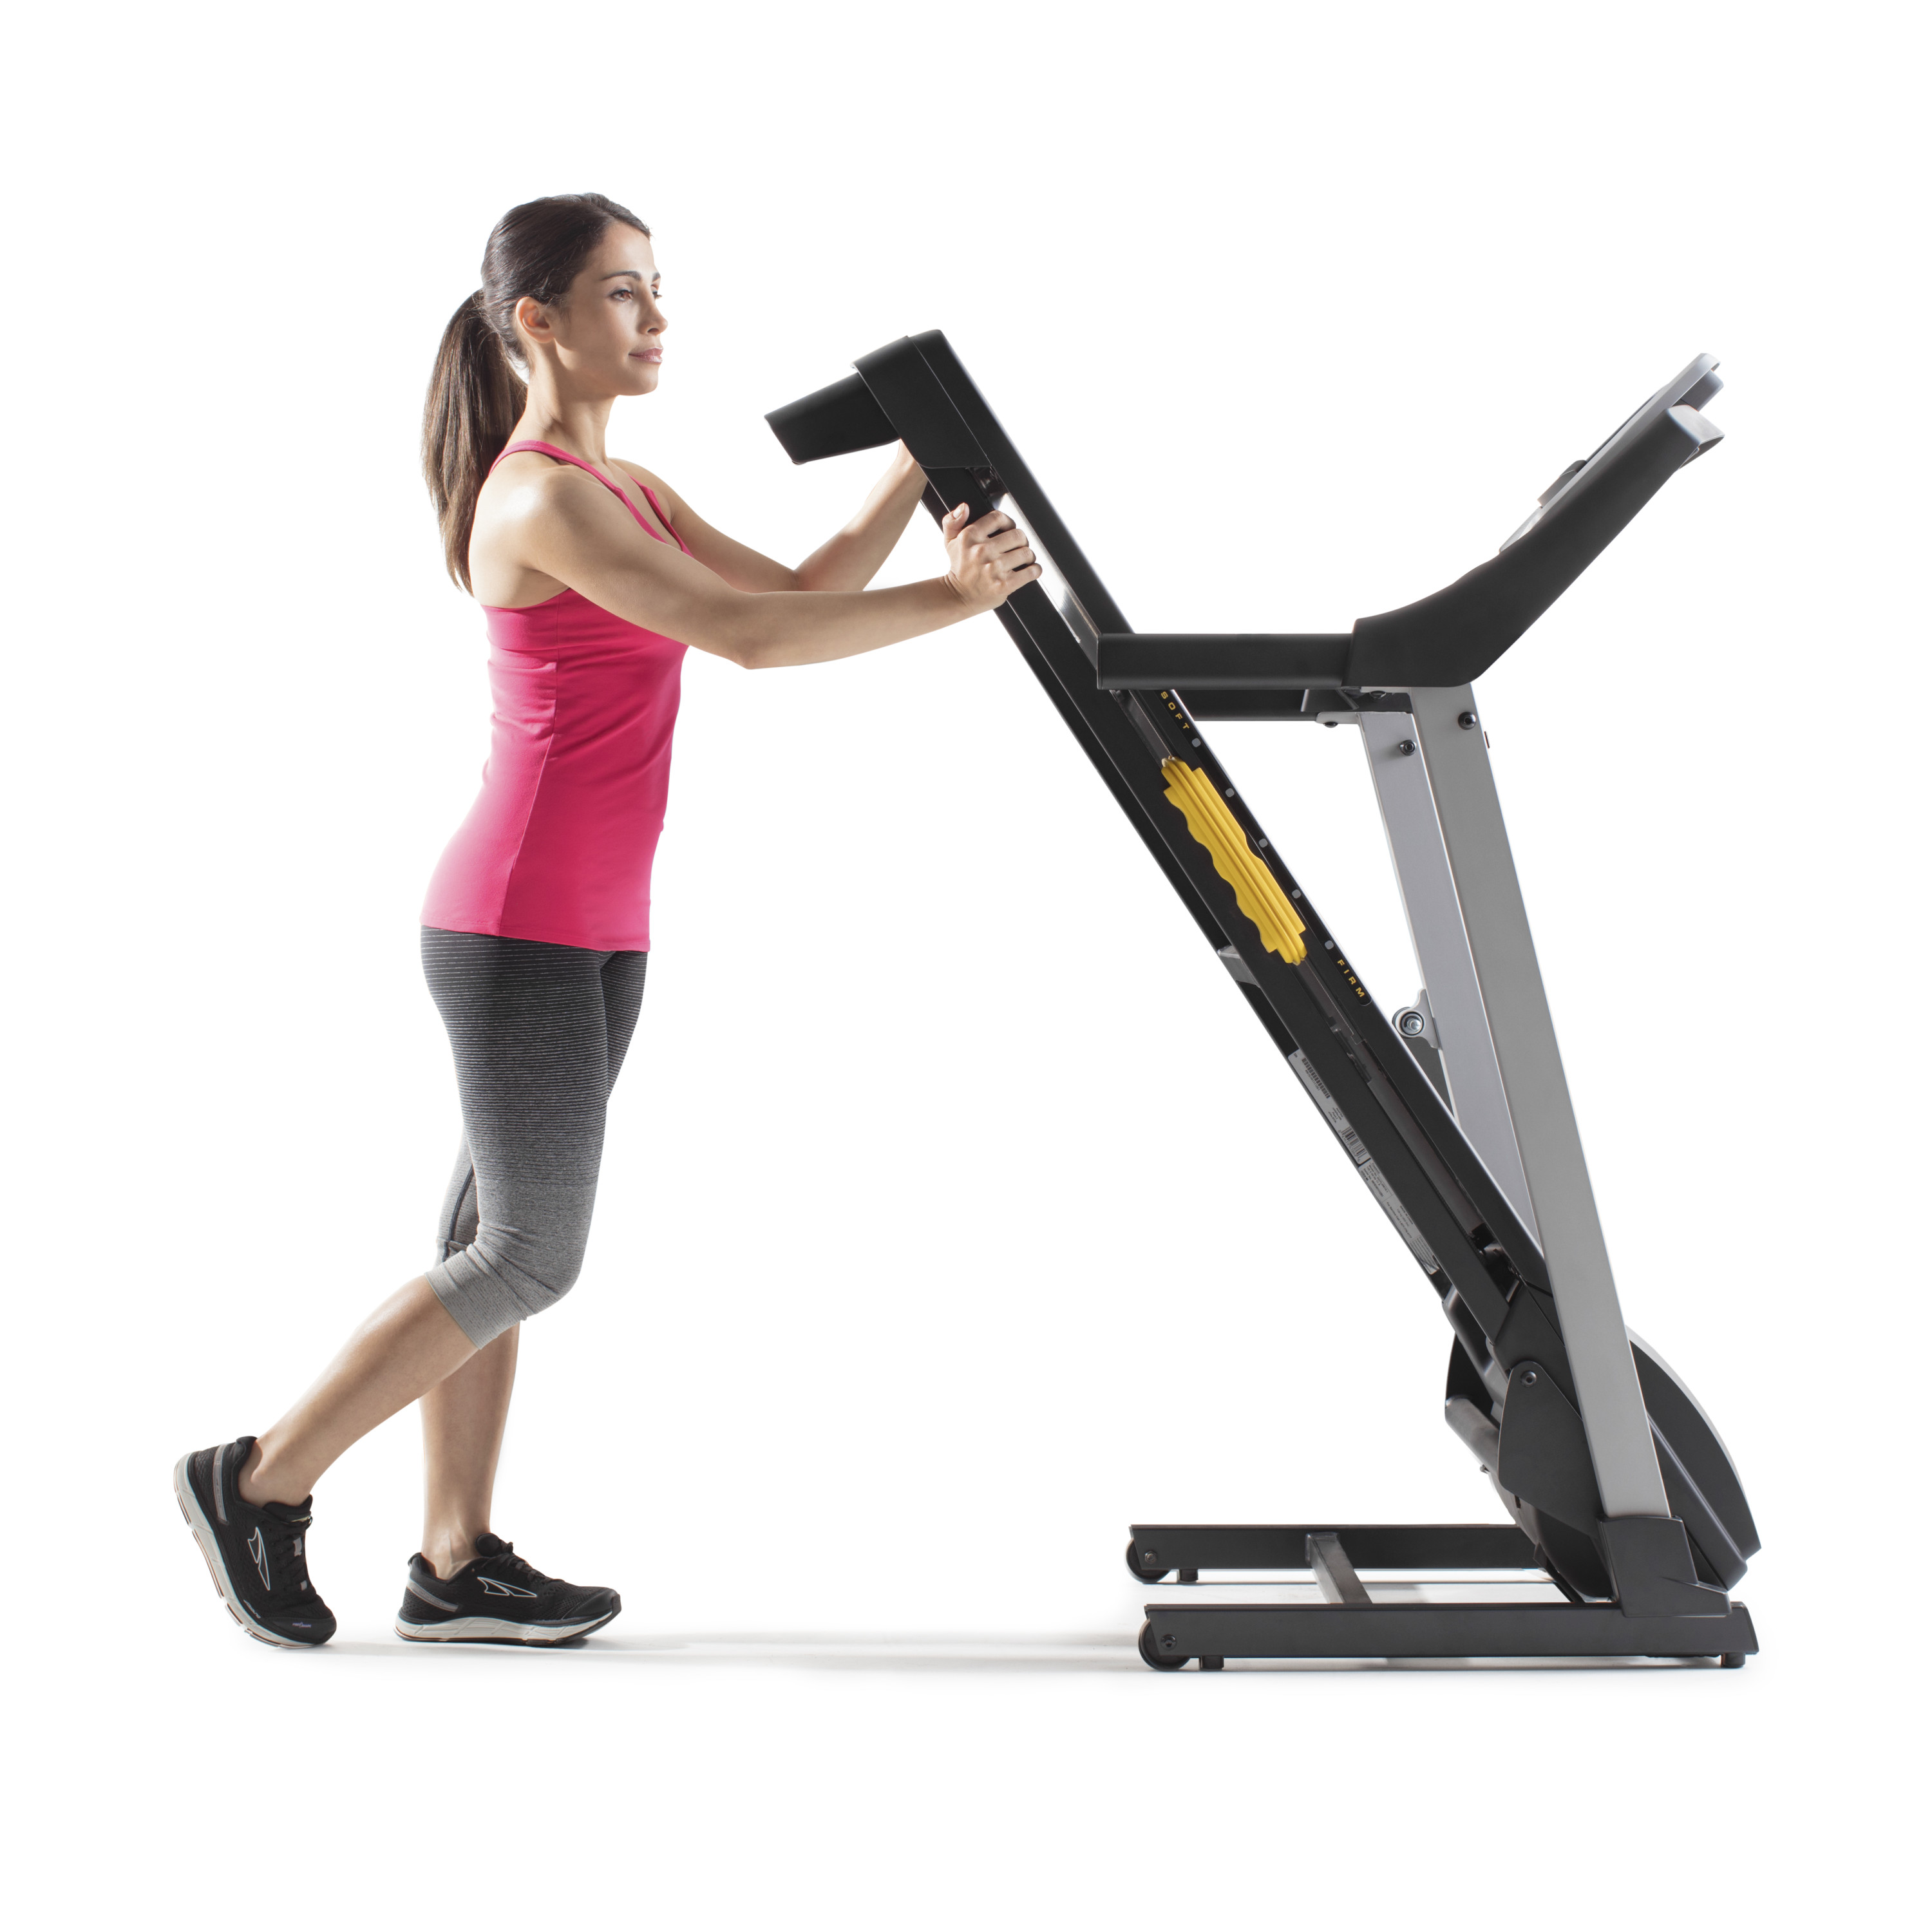 ProForm Trainer 430i Folding Smart Treadmill with 10% Incline, iFit Bluetooth Enabled - image 11 of 18